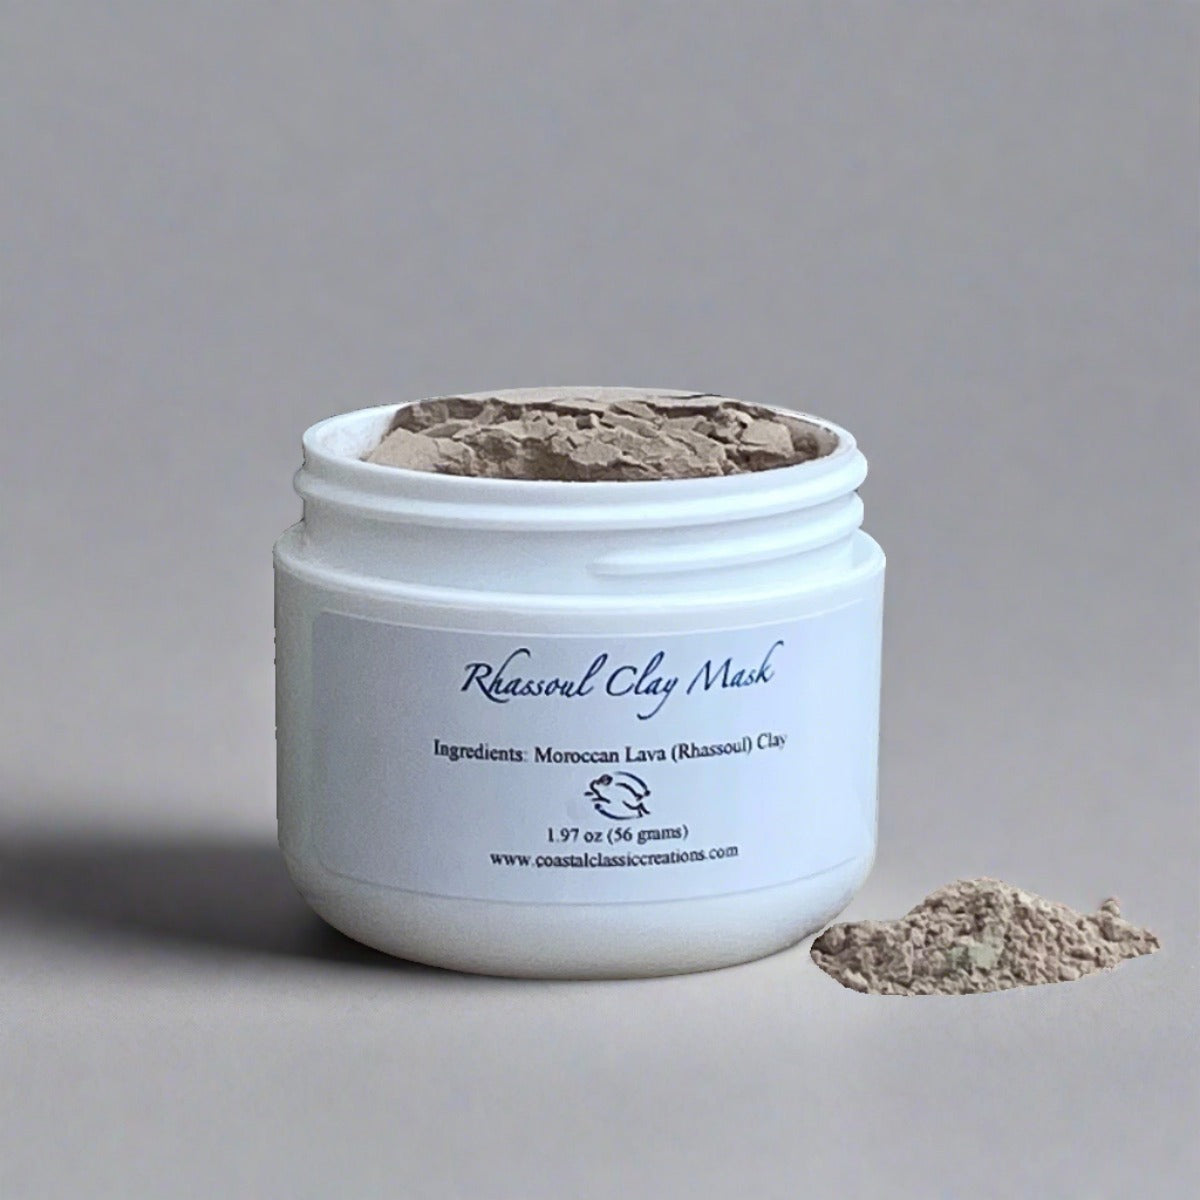 Deep cleansing & face mask in one-Rhassoul Clay